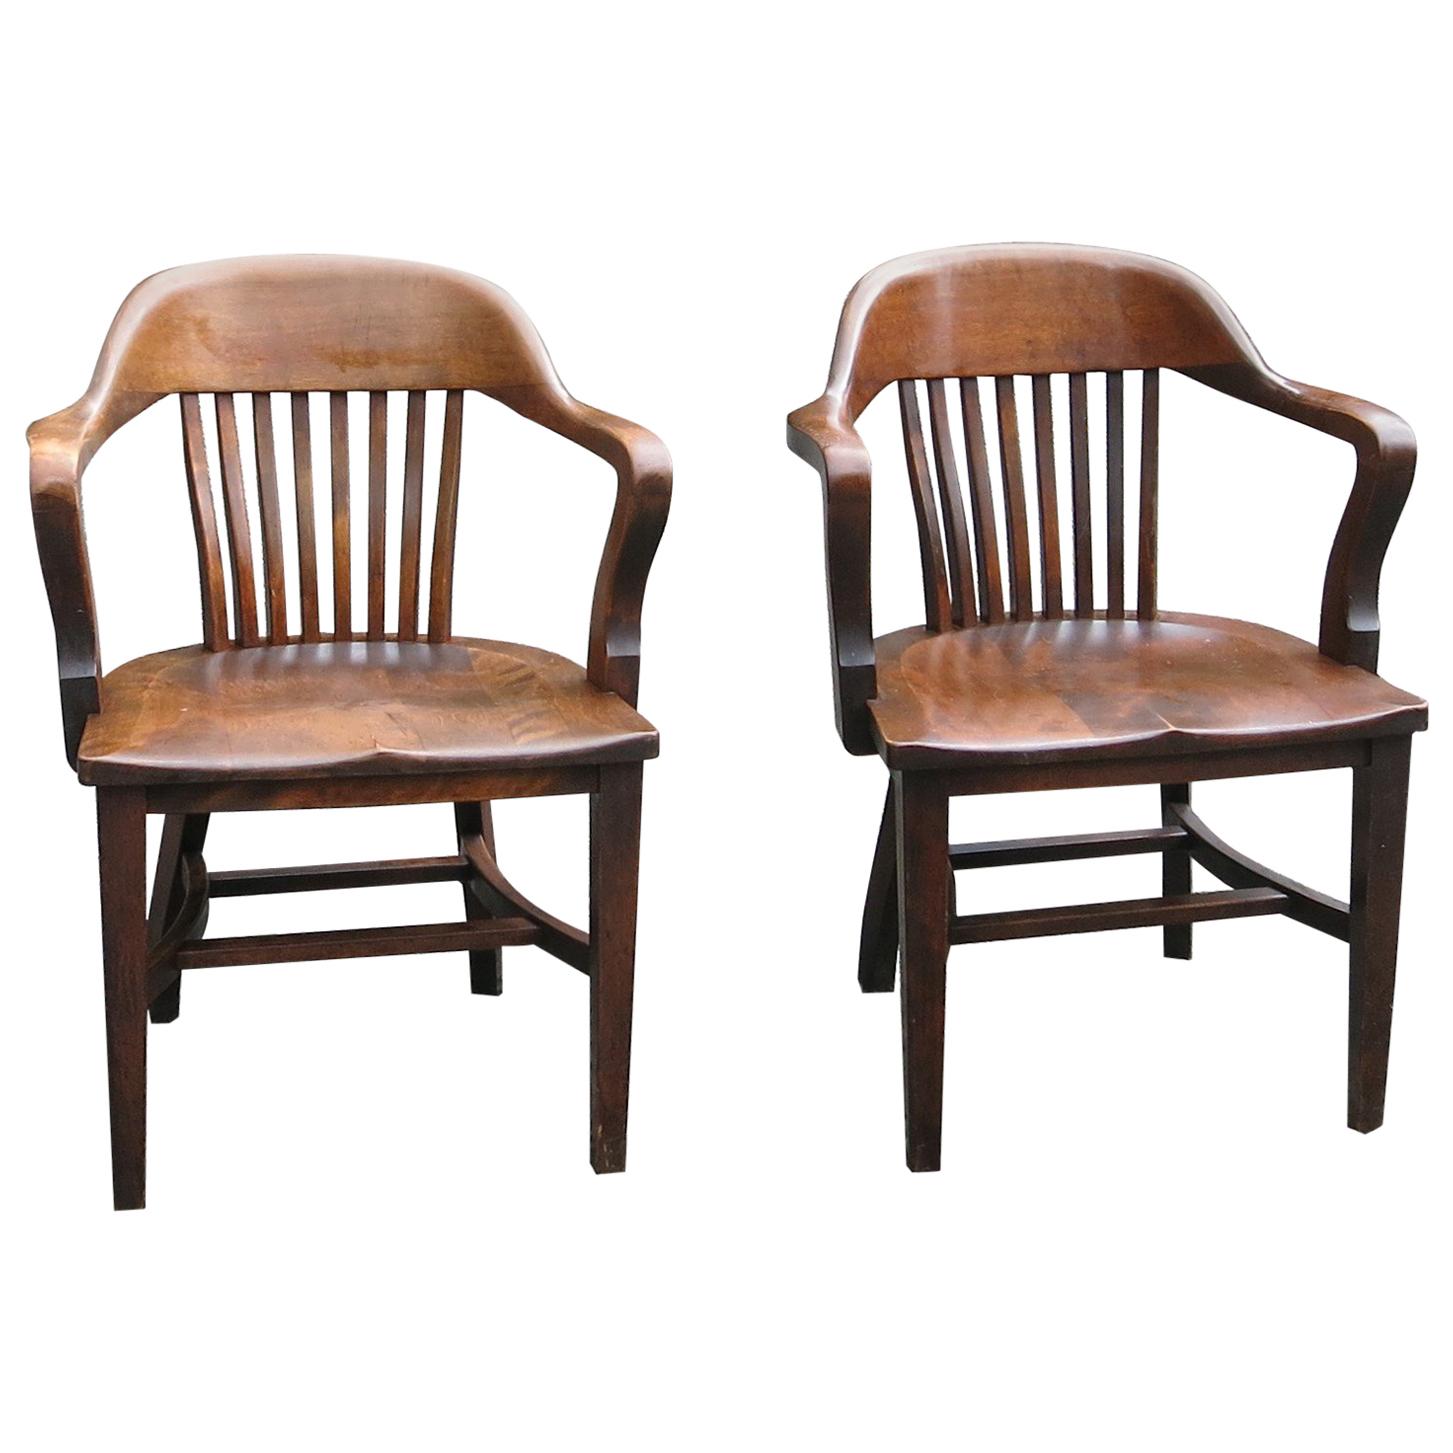 B.L. Marble Bankers Chairs Pair